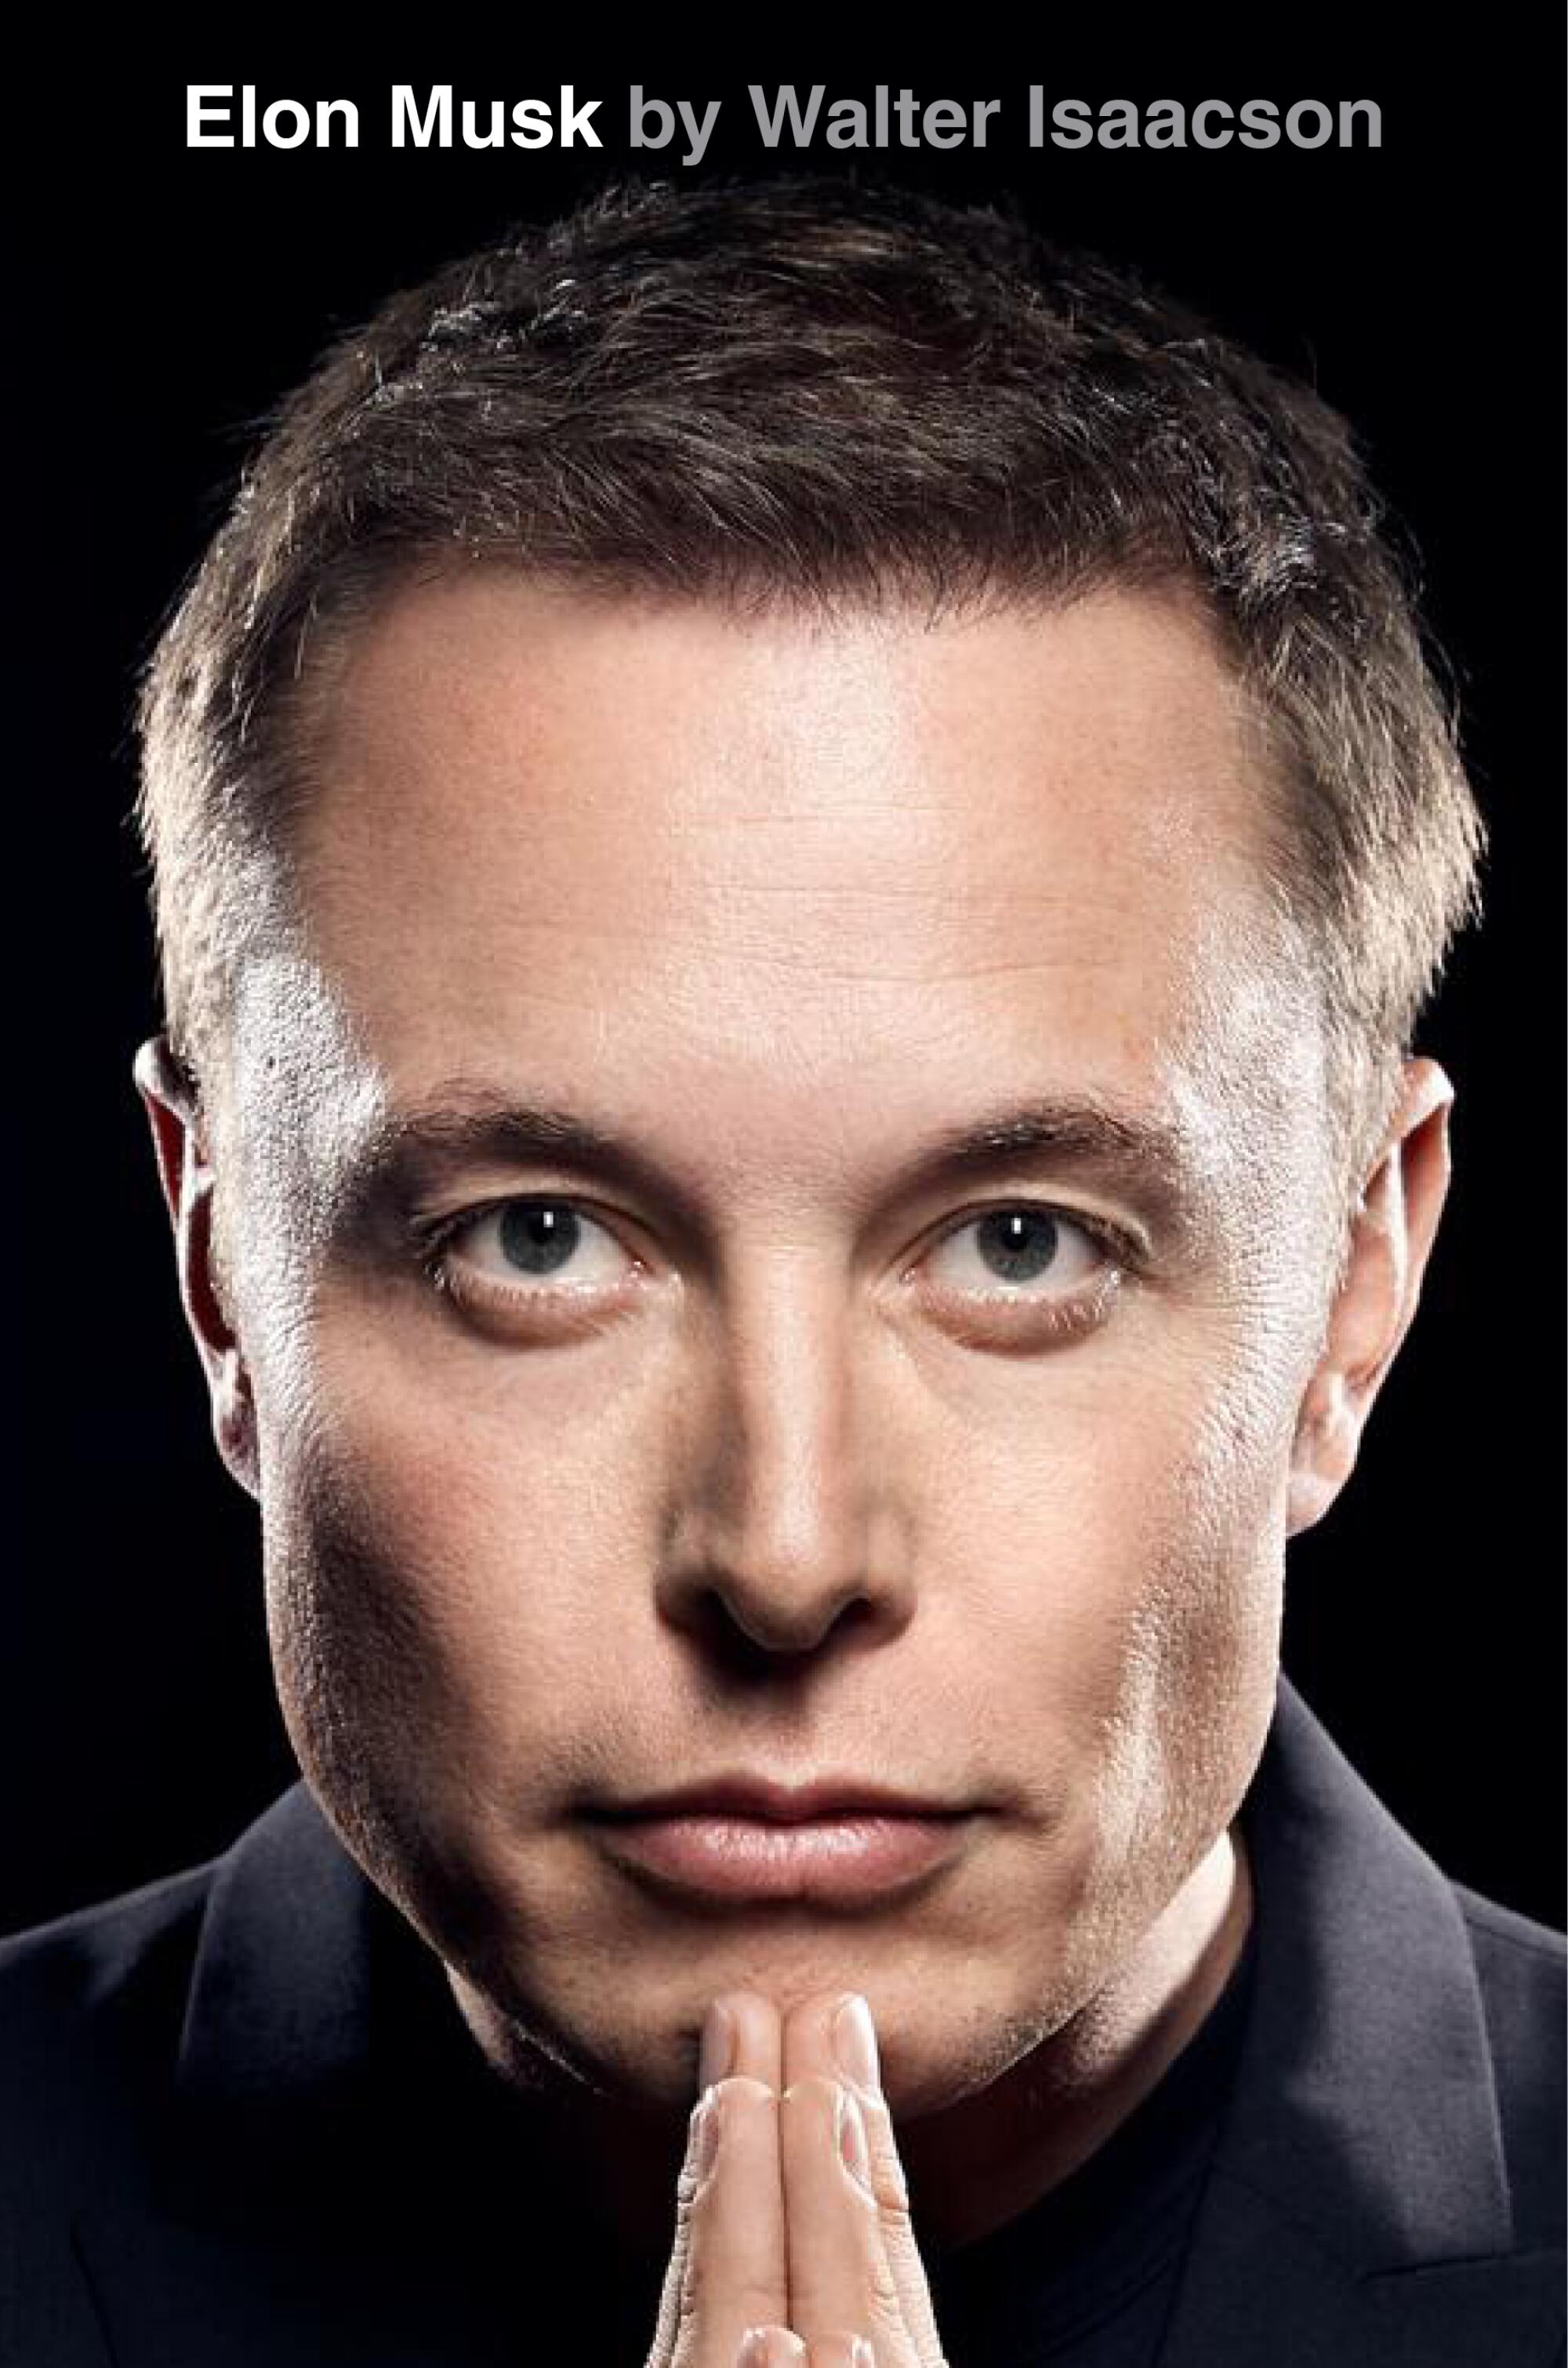 Book cover of "Elon Musk" by Walter Isaacson